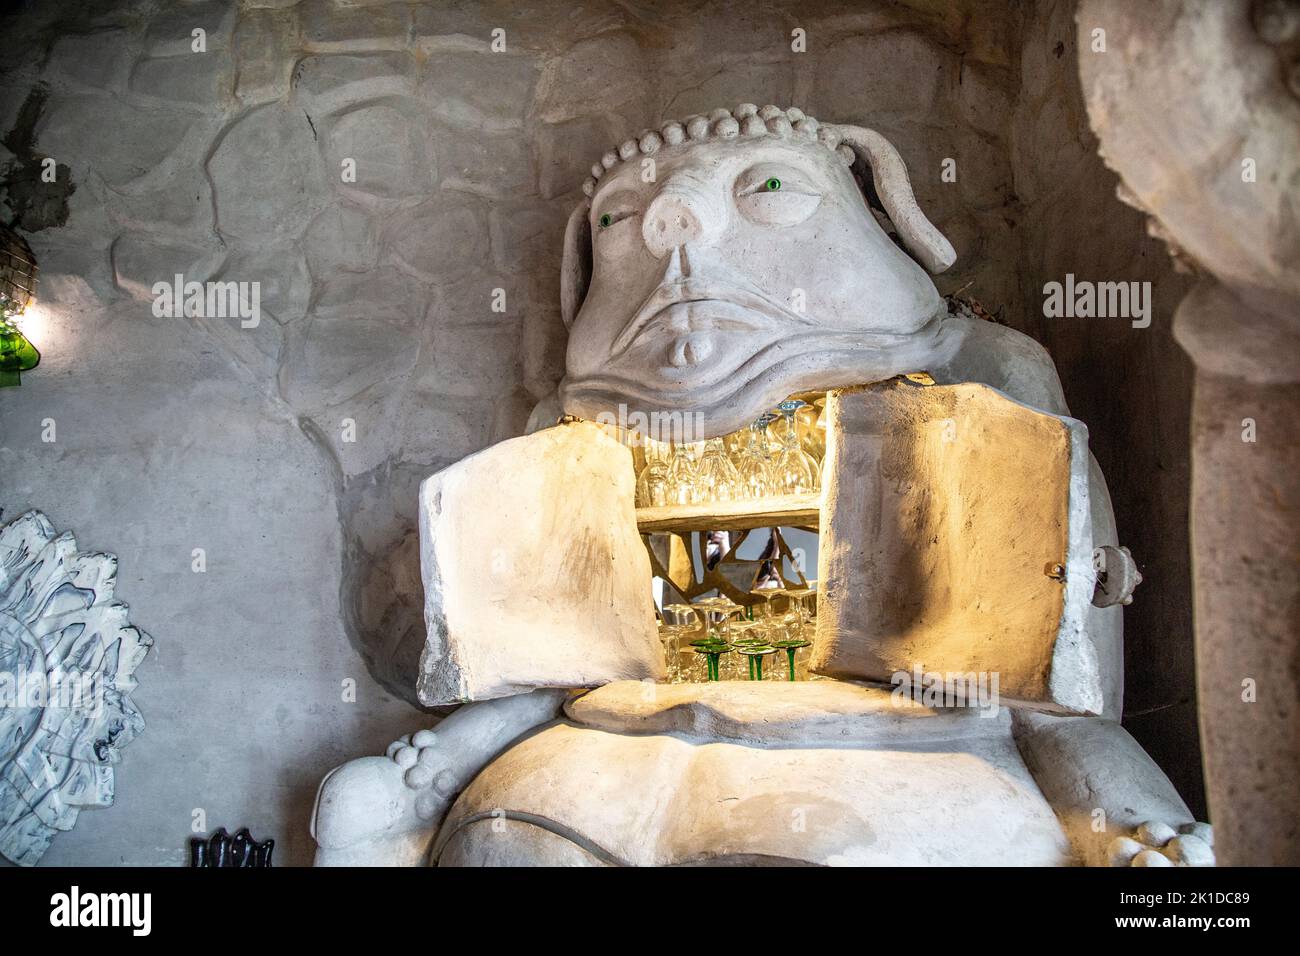 Fantasy bar sculptued out of concrete at the villa in Bruno Weber Park, Dietikon, Switzerland Stock Photo